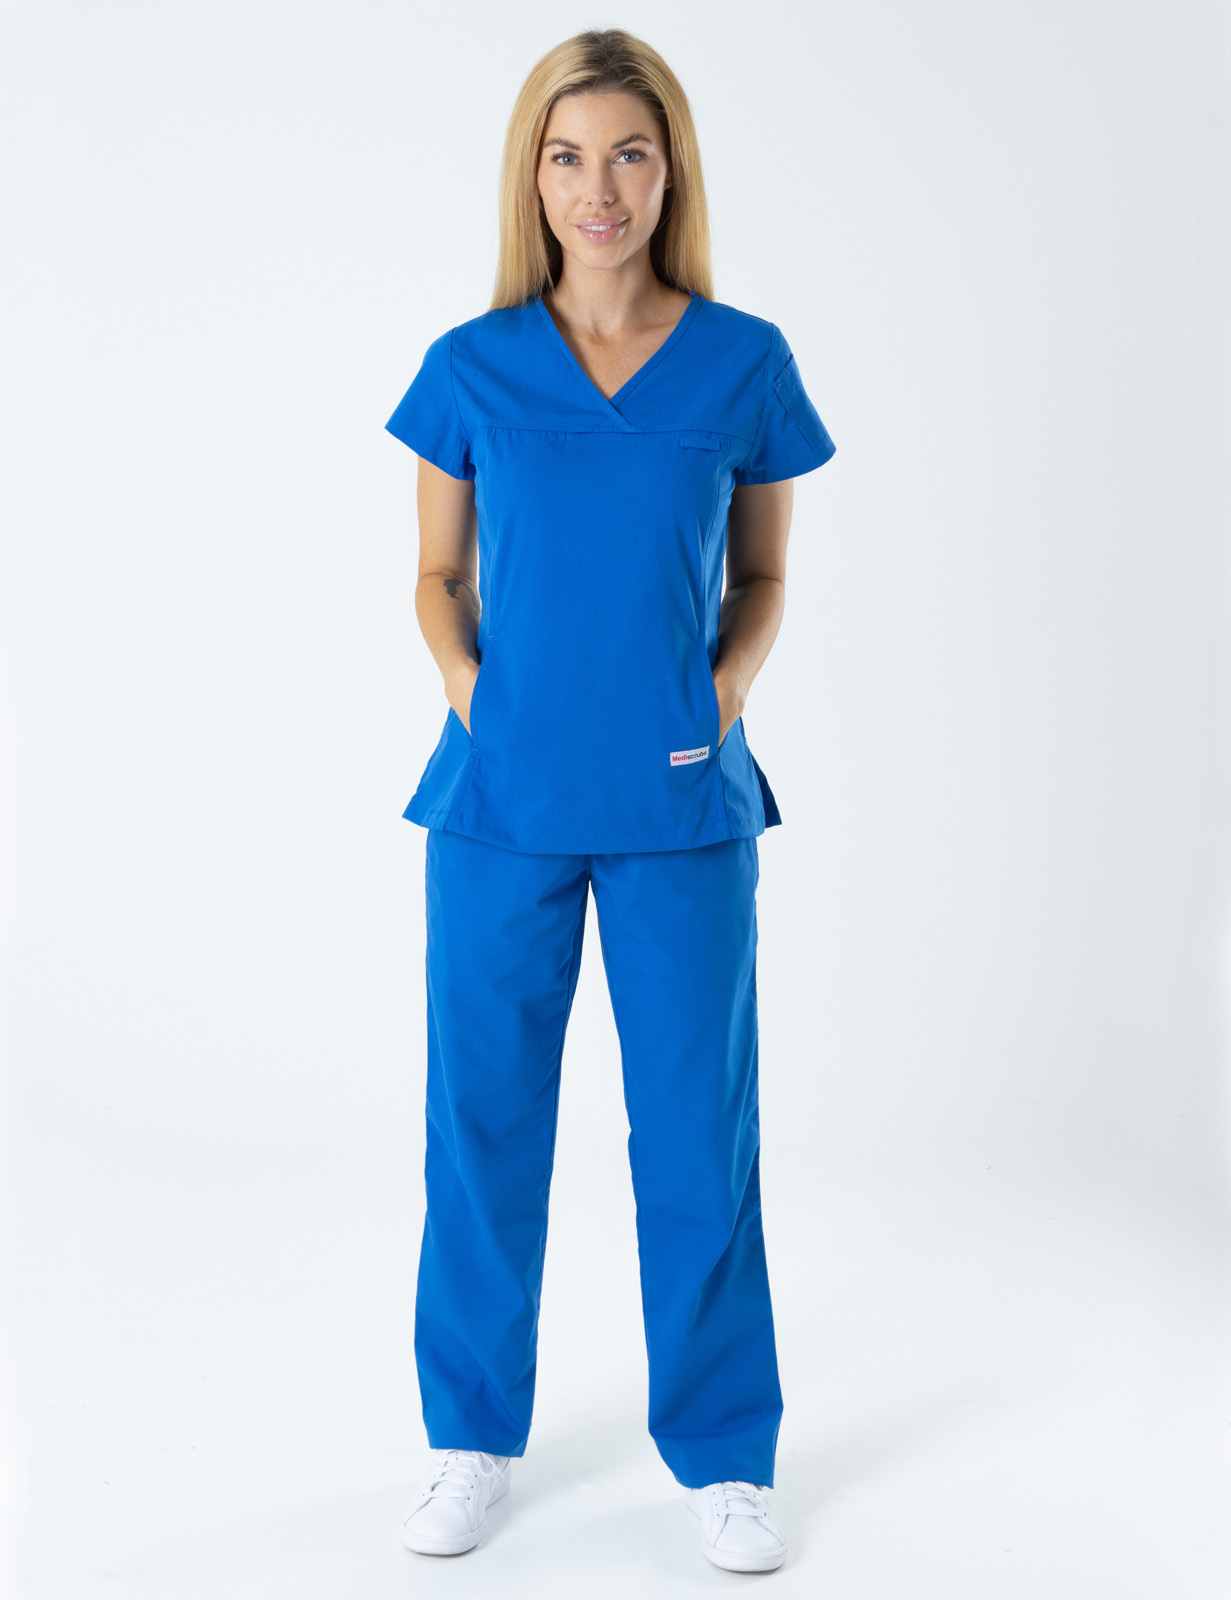 Women's Fit Solid Scrub Top - Royal - Large